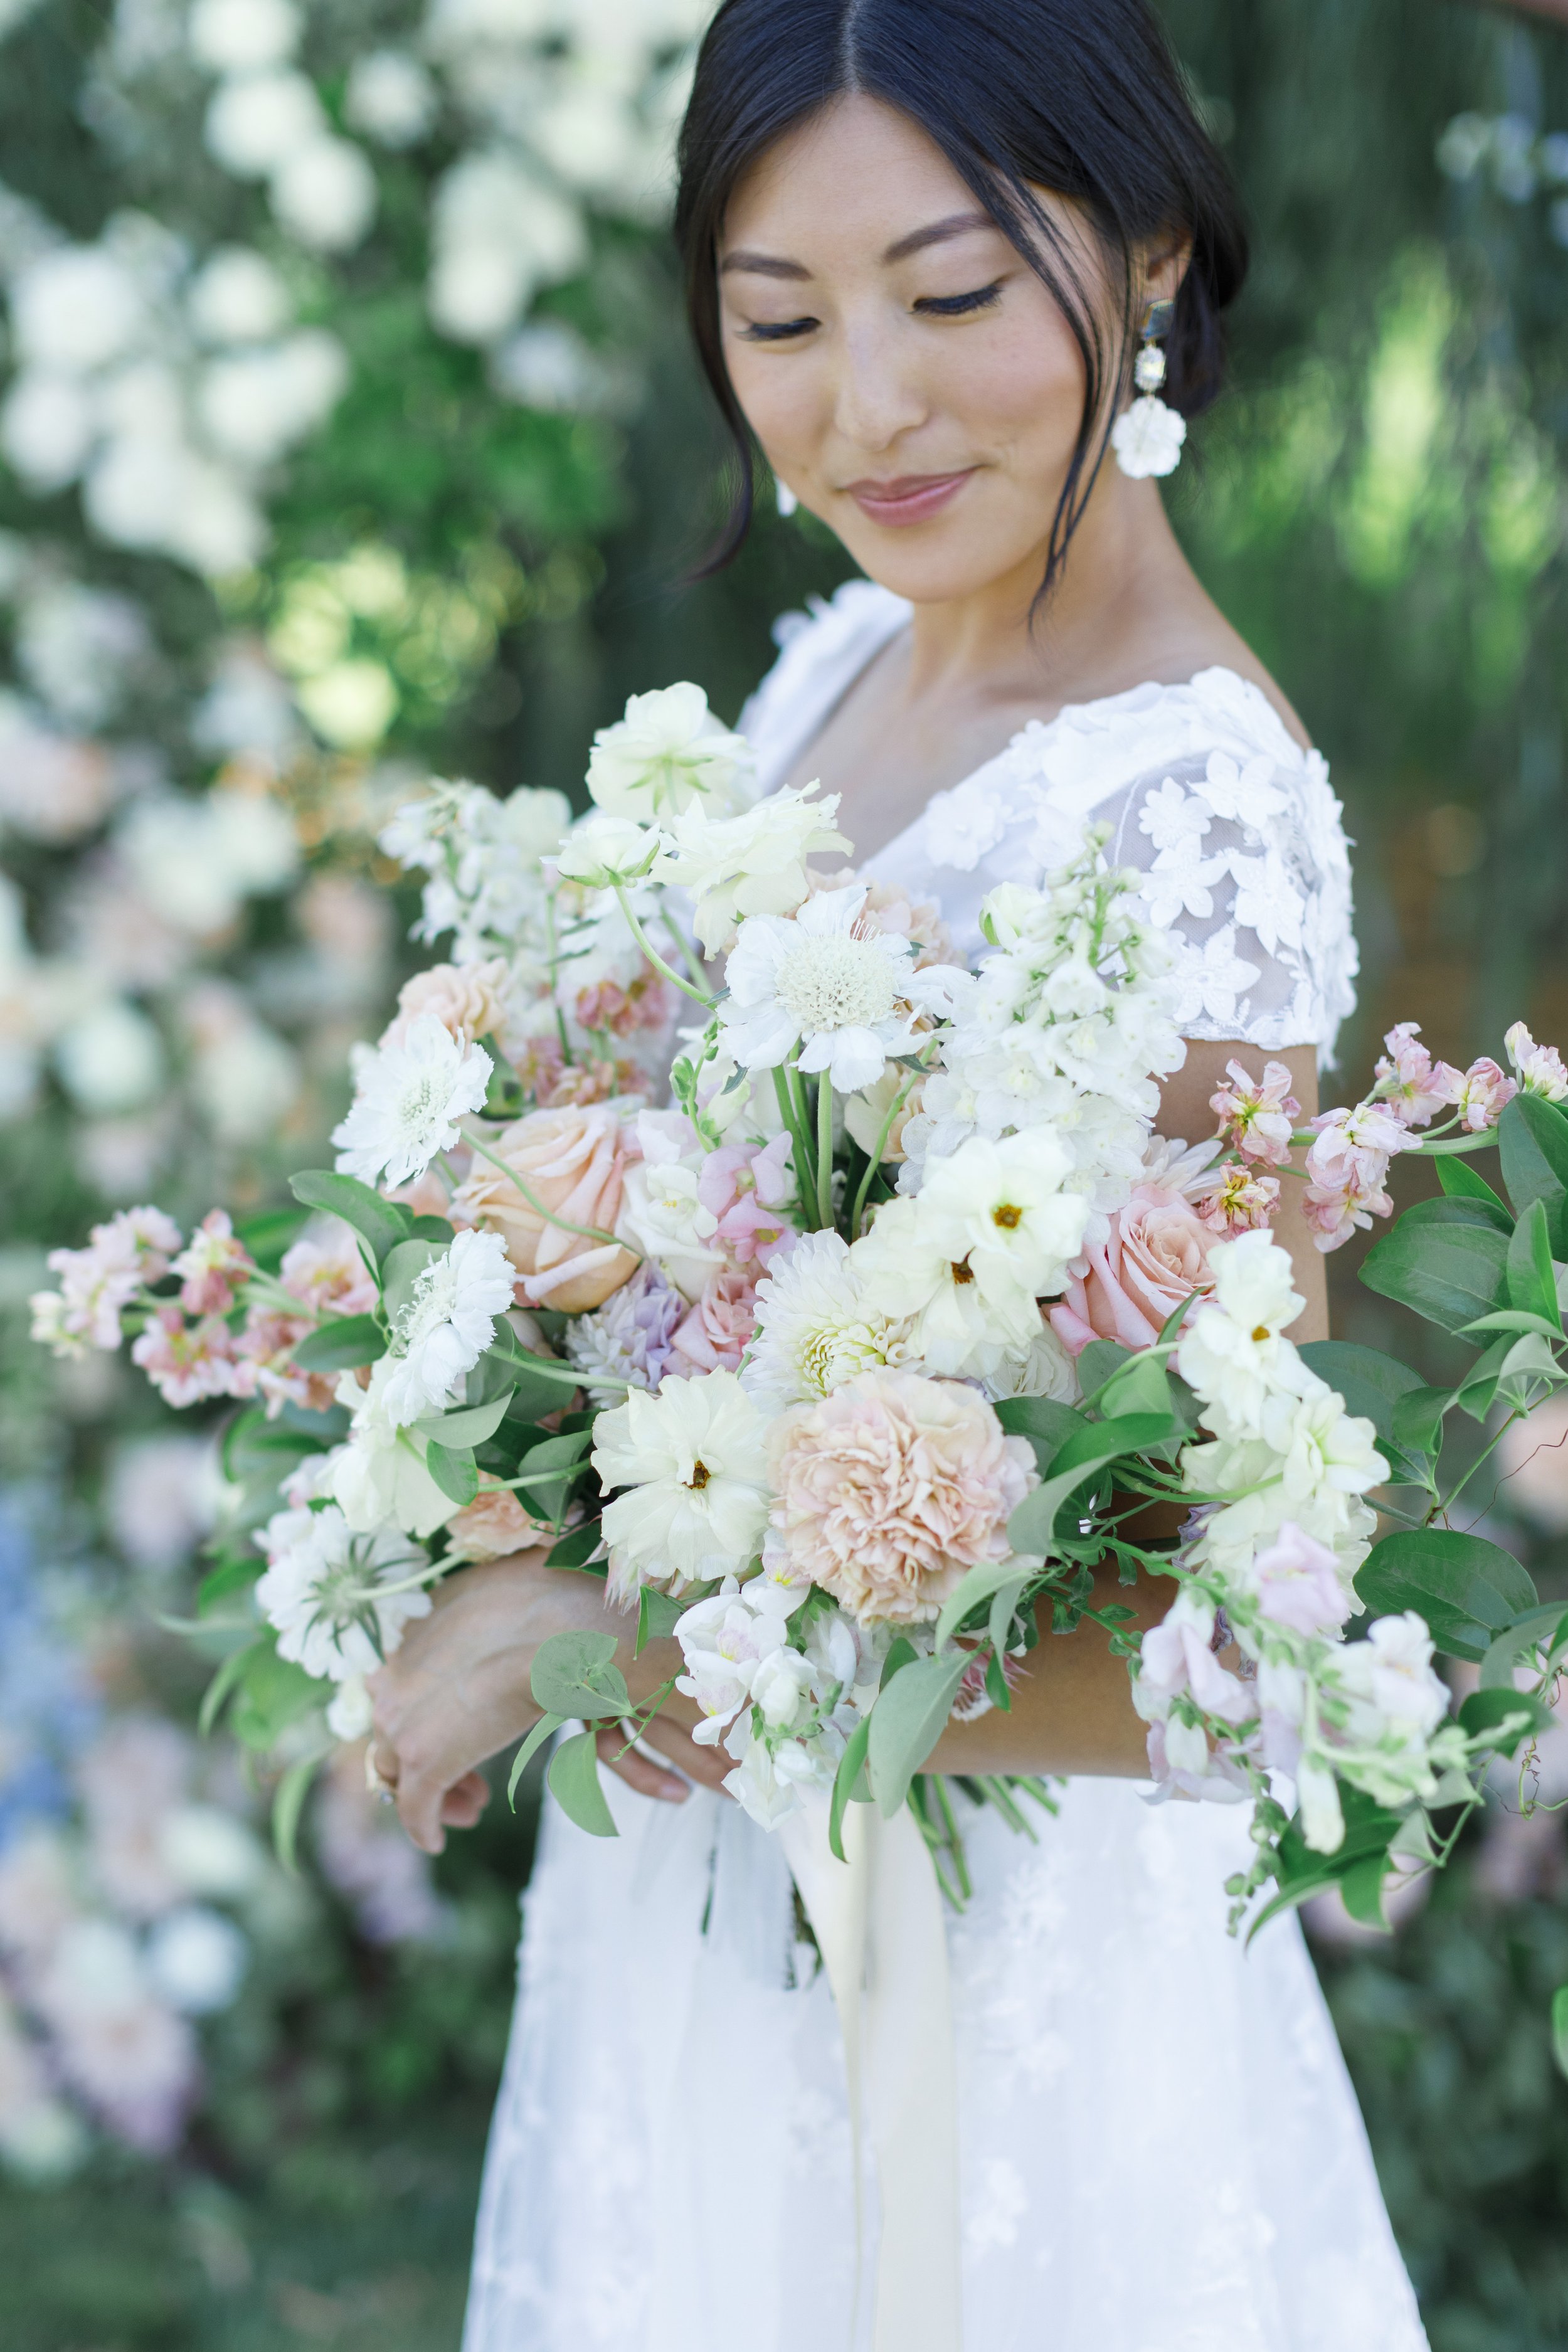  A spring bridal bouquet with blush pink and white flowers captured by Savanna Richardson Photography. spring wedding #SavannaRichardsonPhotography #SavannaRichardsonWeddings #bridals #formals #bouquets #Utahweddingphotographers #Wedding 